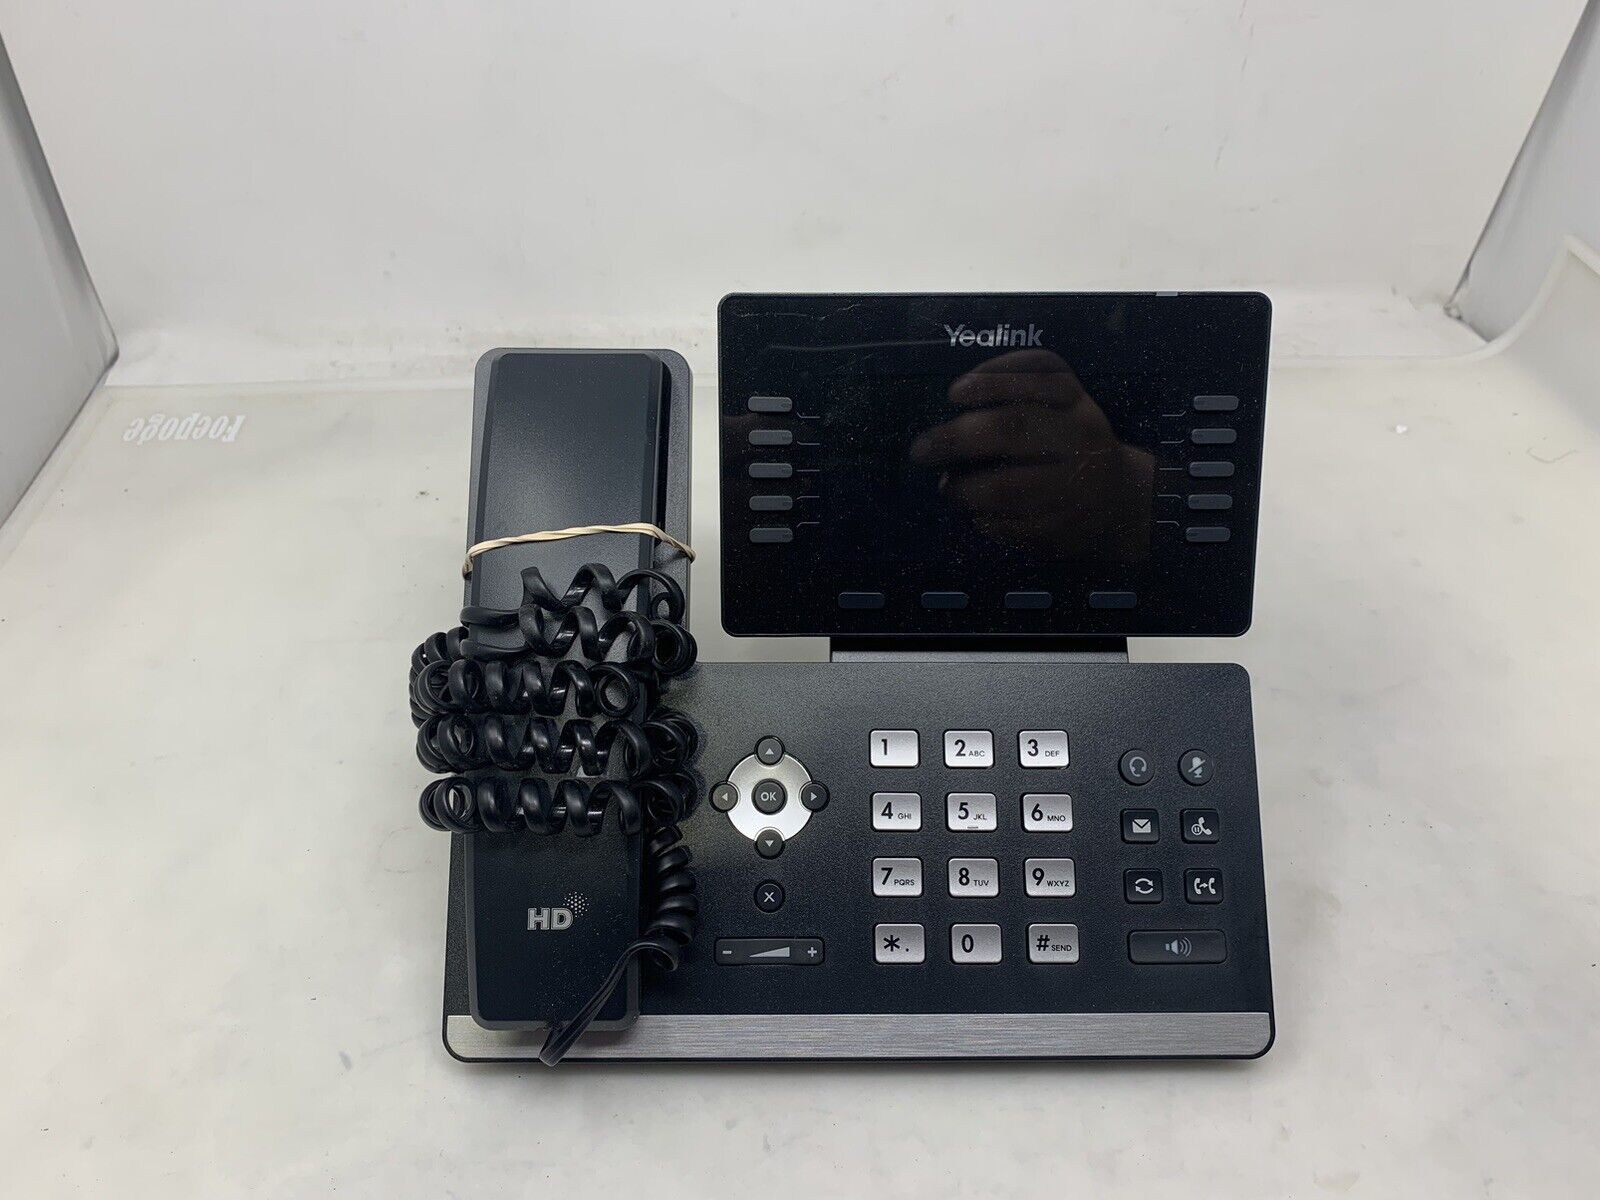 Yealink SIP-T57W Prime Business Phone With Handset and Stand 71024F16